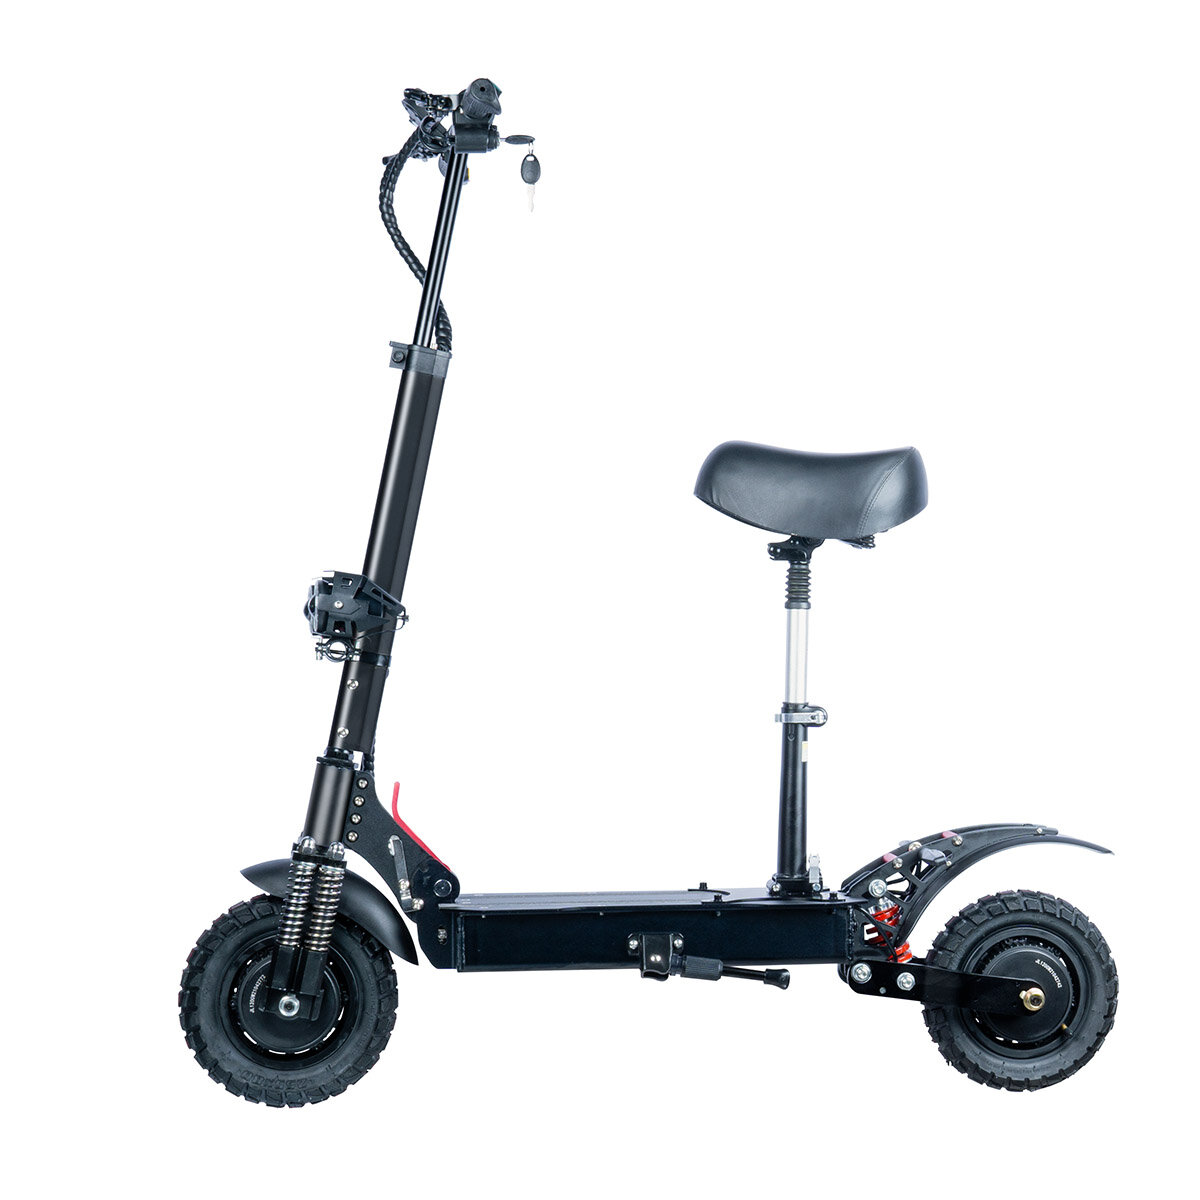 [US Direct] TOURSOR T4 52V 23.4Ah 1200W*2 Dual Motor 10inch Folding Electric Scooter Dual Oil Brake 90KM Max Mileage 150KG Max Load E-Scooter COD